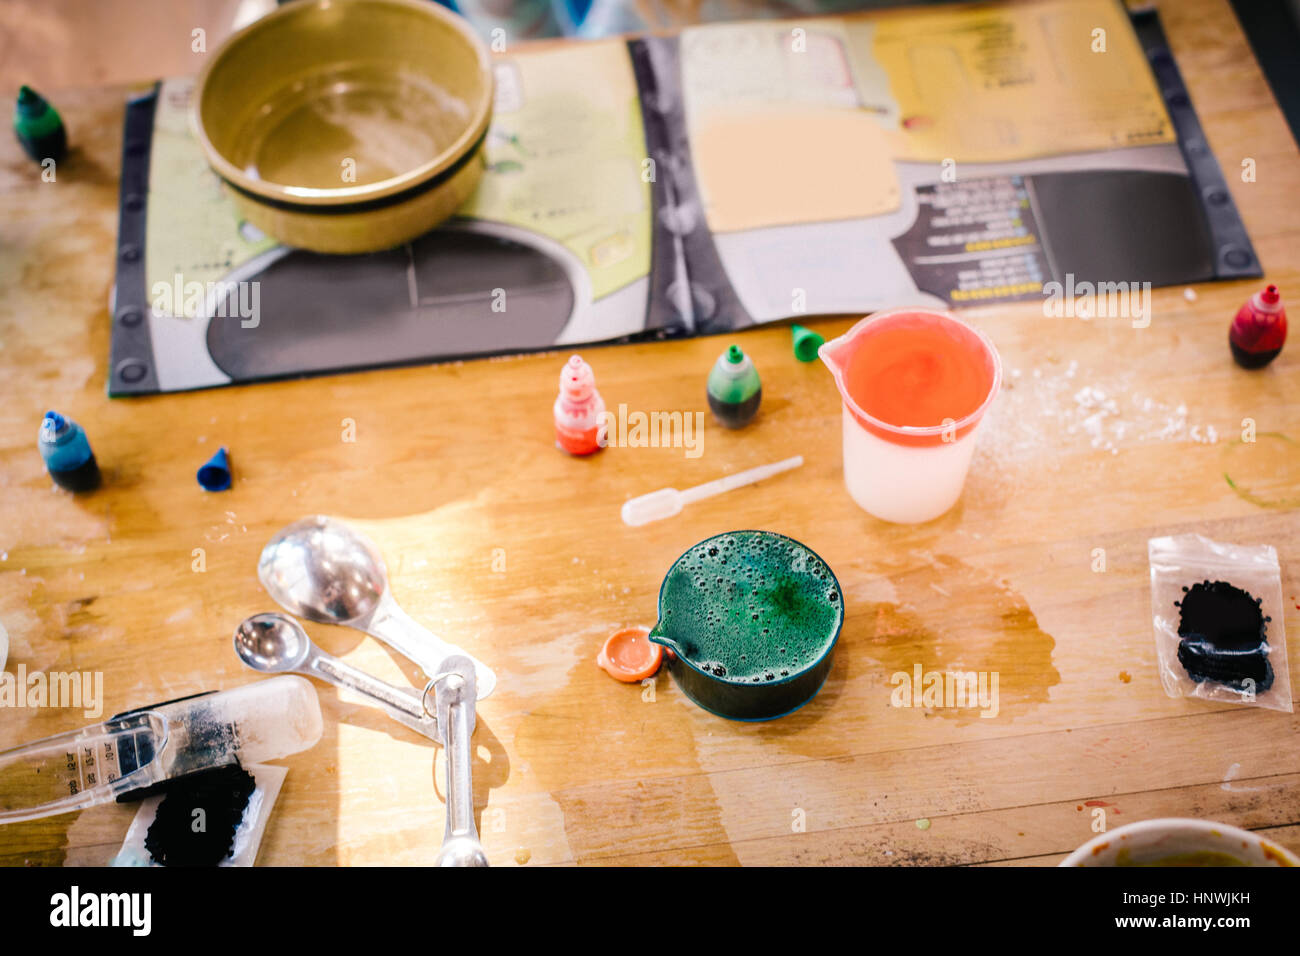 Child's messy chemistry set science experiment on table with instructions Stock Photo